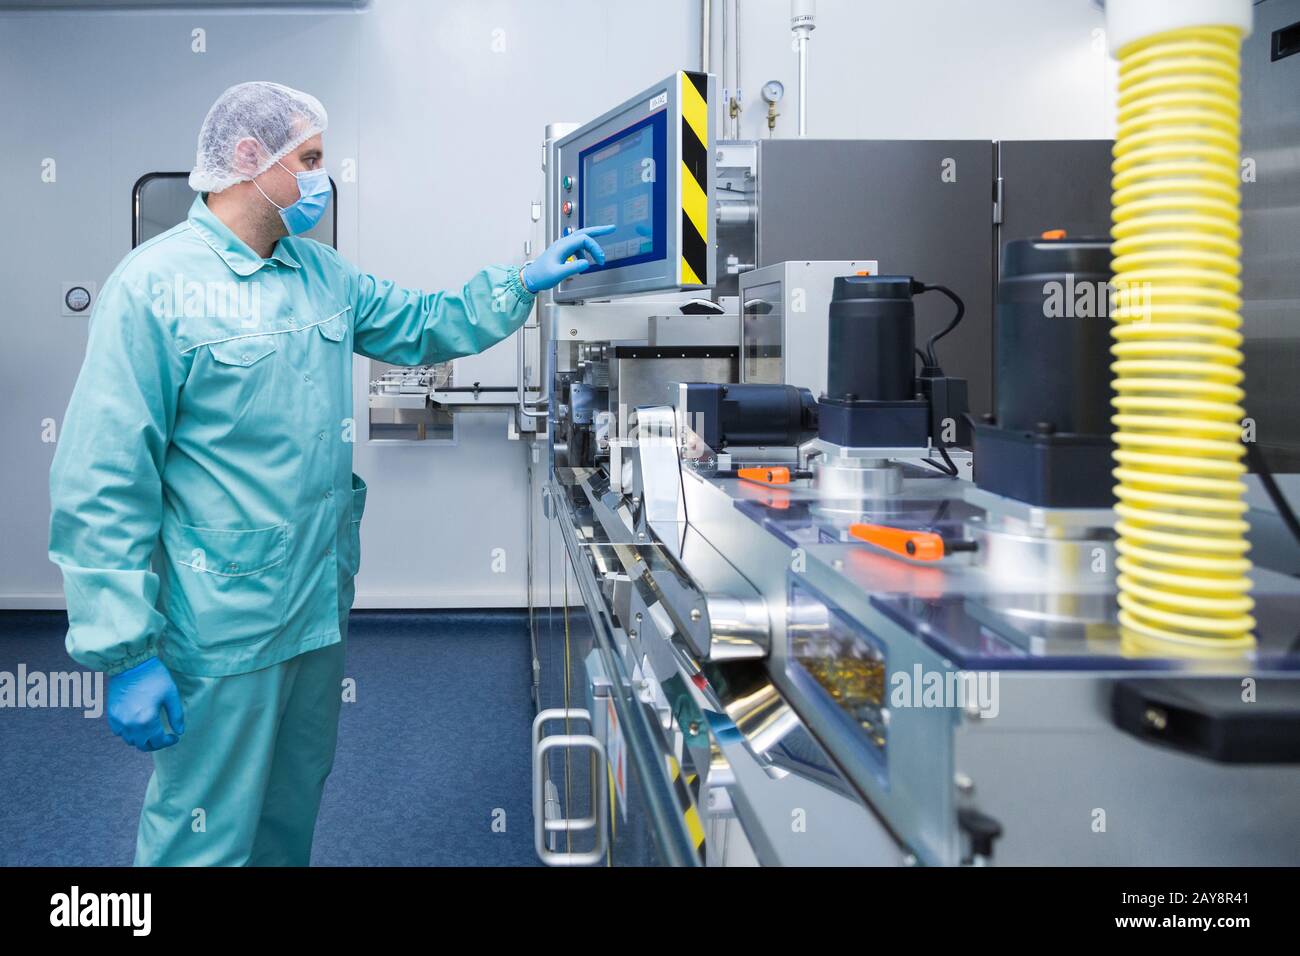 Pharmacy industry factory man worker in protective clothing in sterile working conditions operating on pharmaceutical equipment Stock Photo